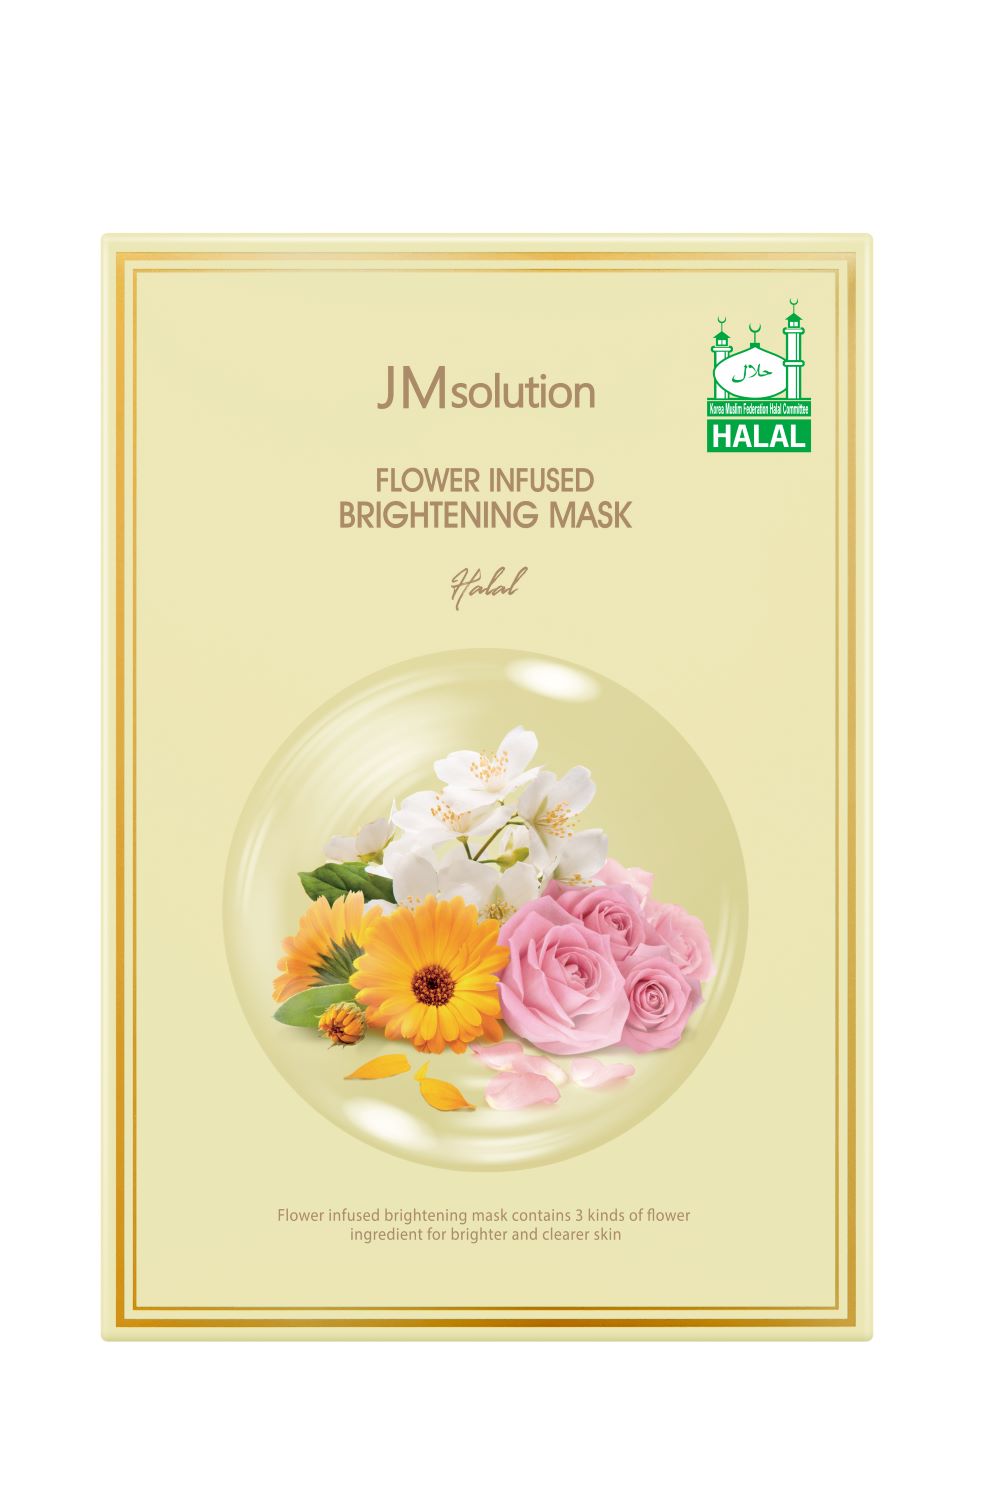 JMSOLUTION FLOWER INFUSED BRIGHTENING MASK HALAL 30ml x 10  pices